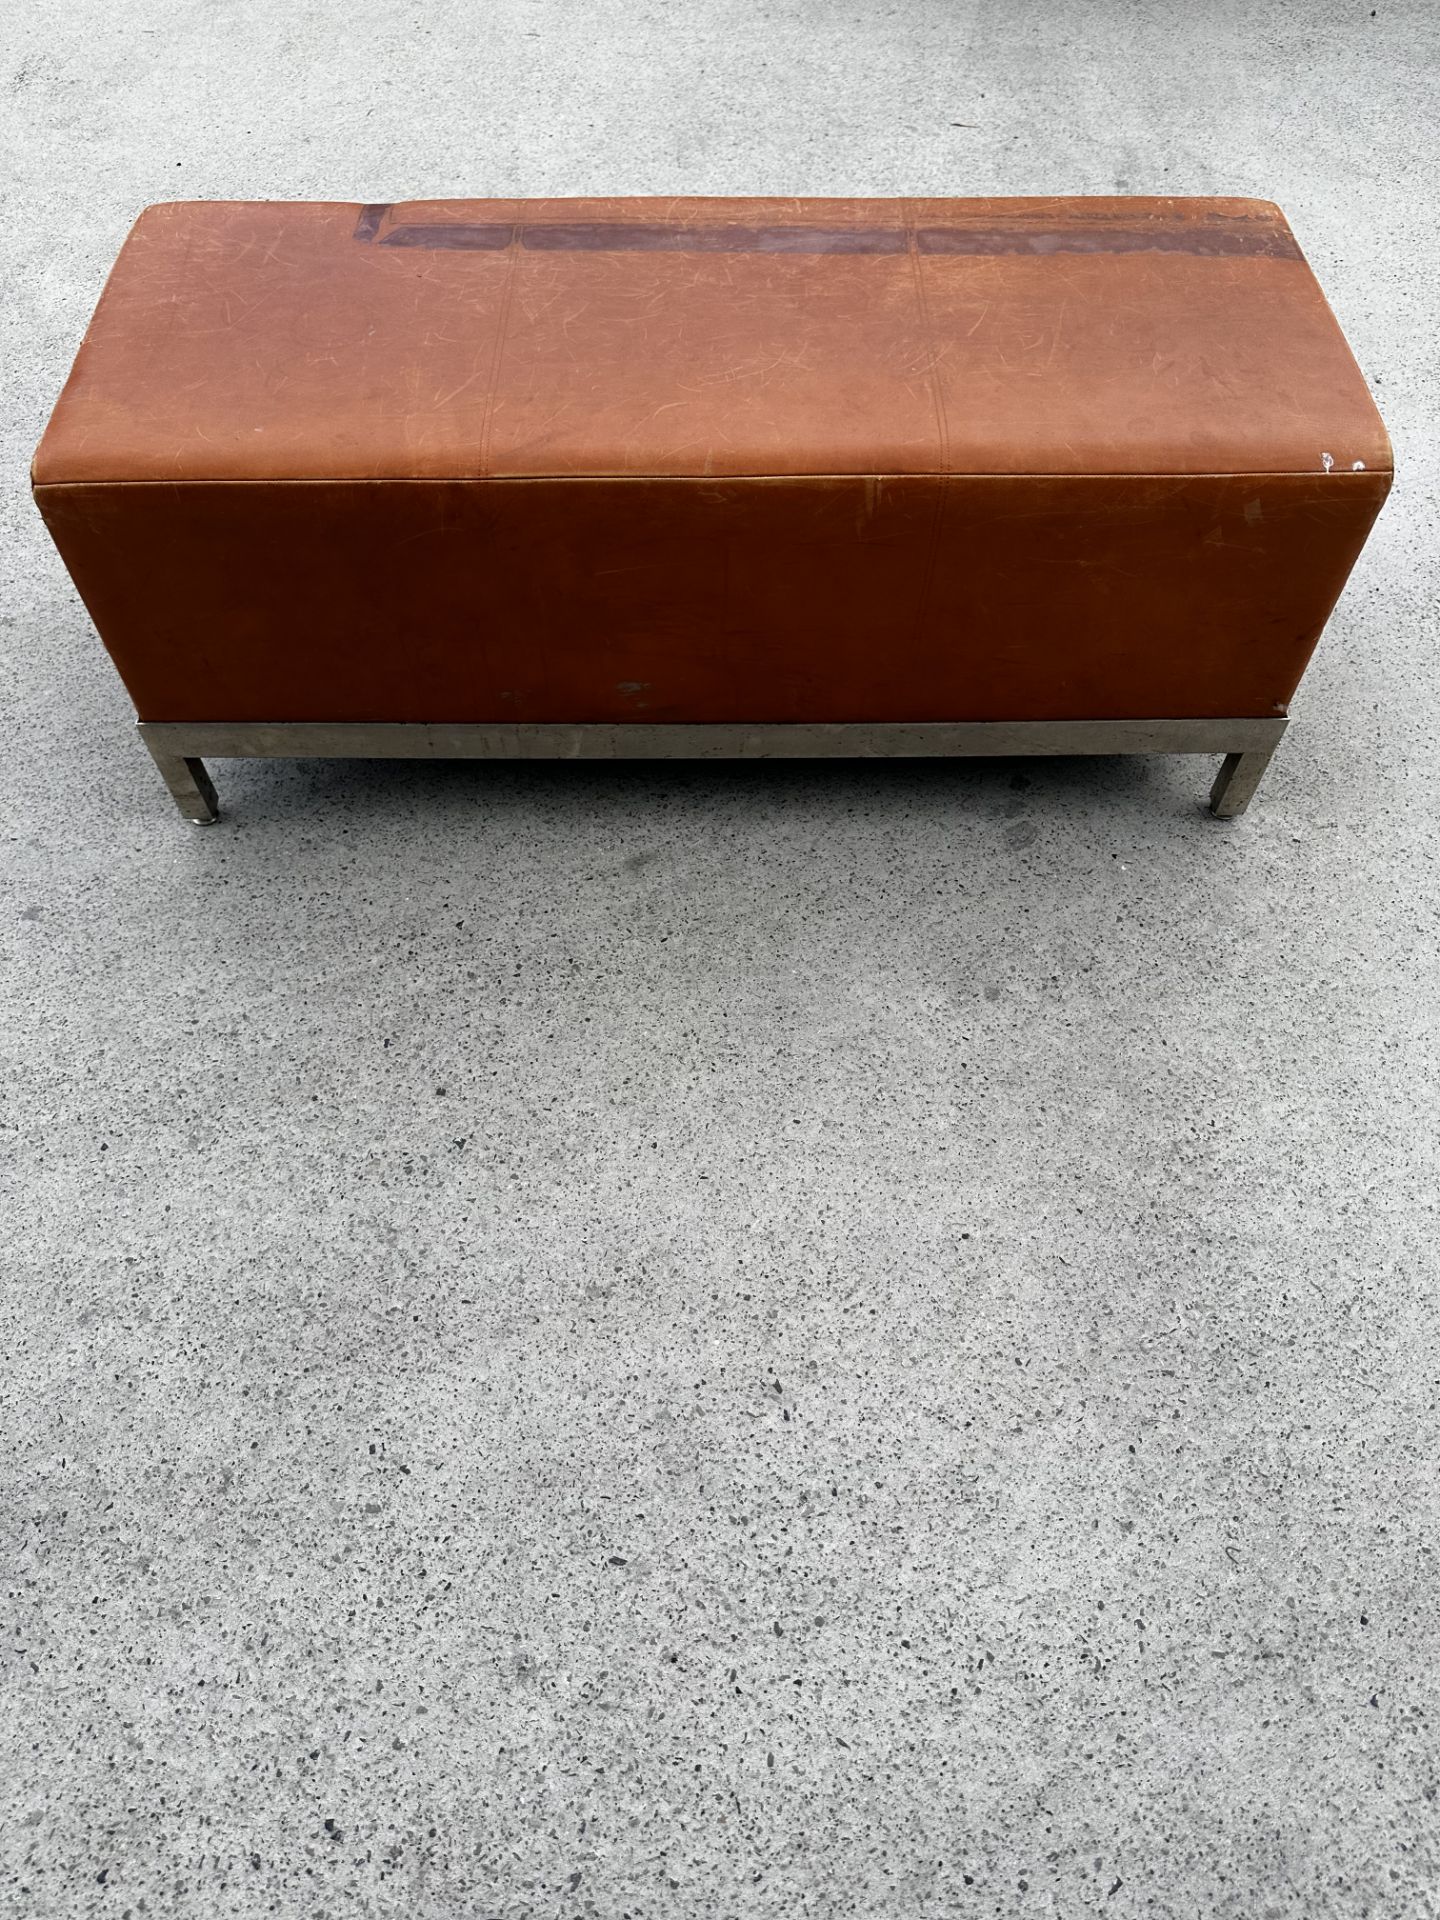 Vintage Look Leather Foot Stool 113*44*44cm Sourced From Luxury House Clearance - Image 2 of 3